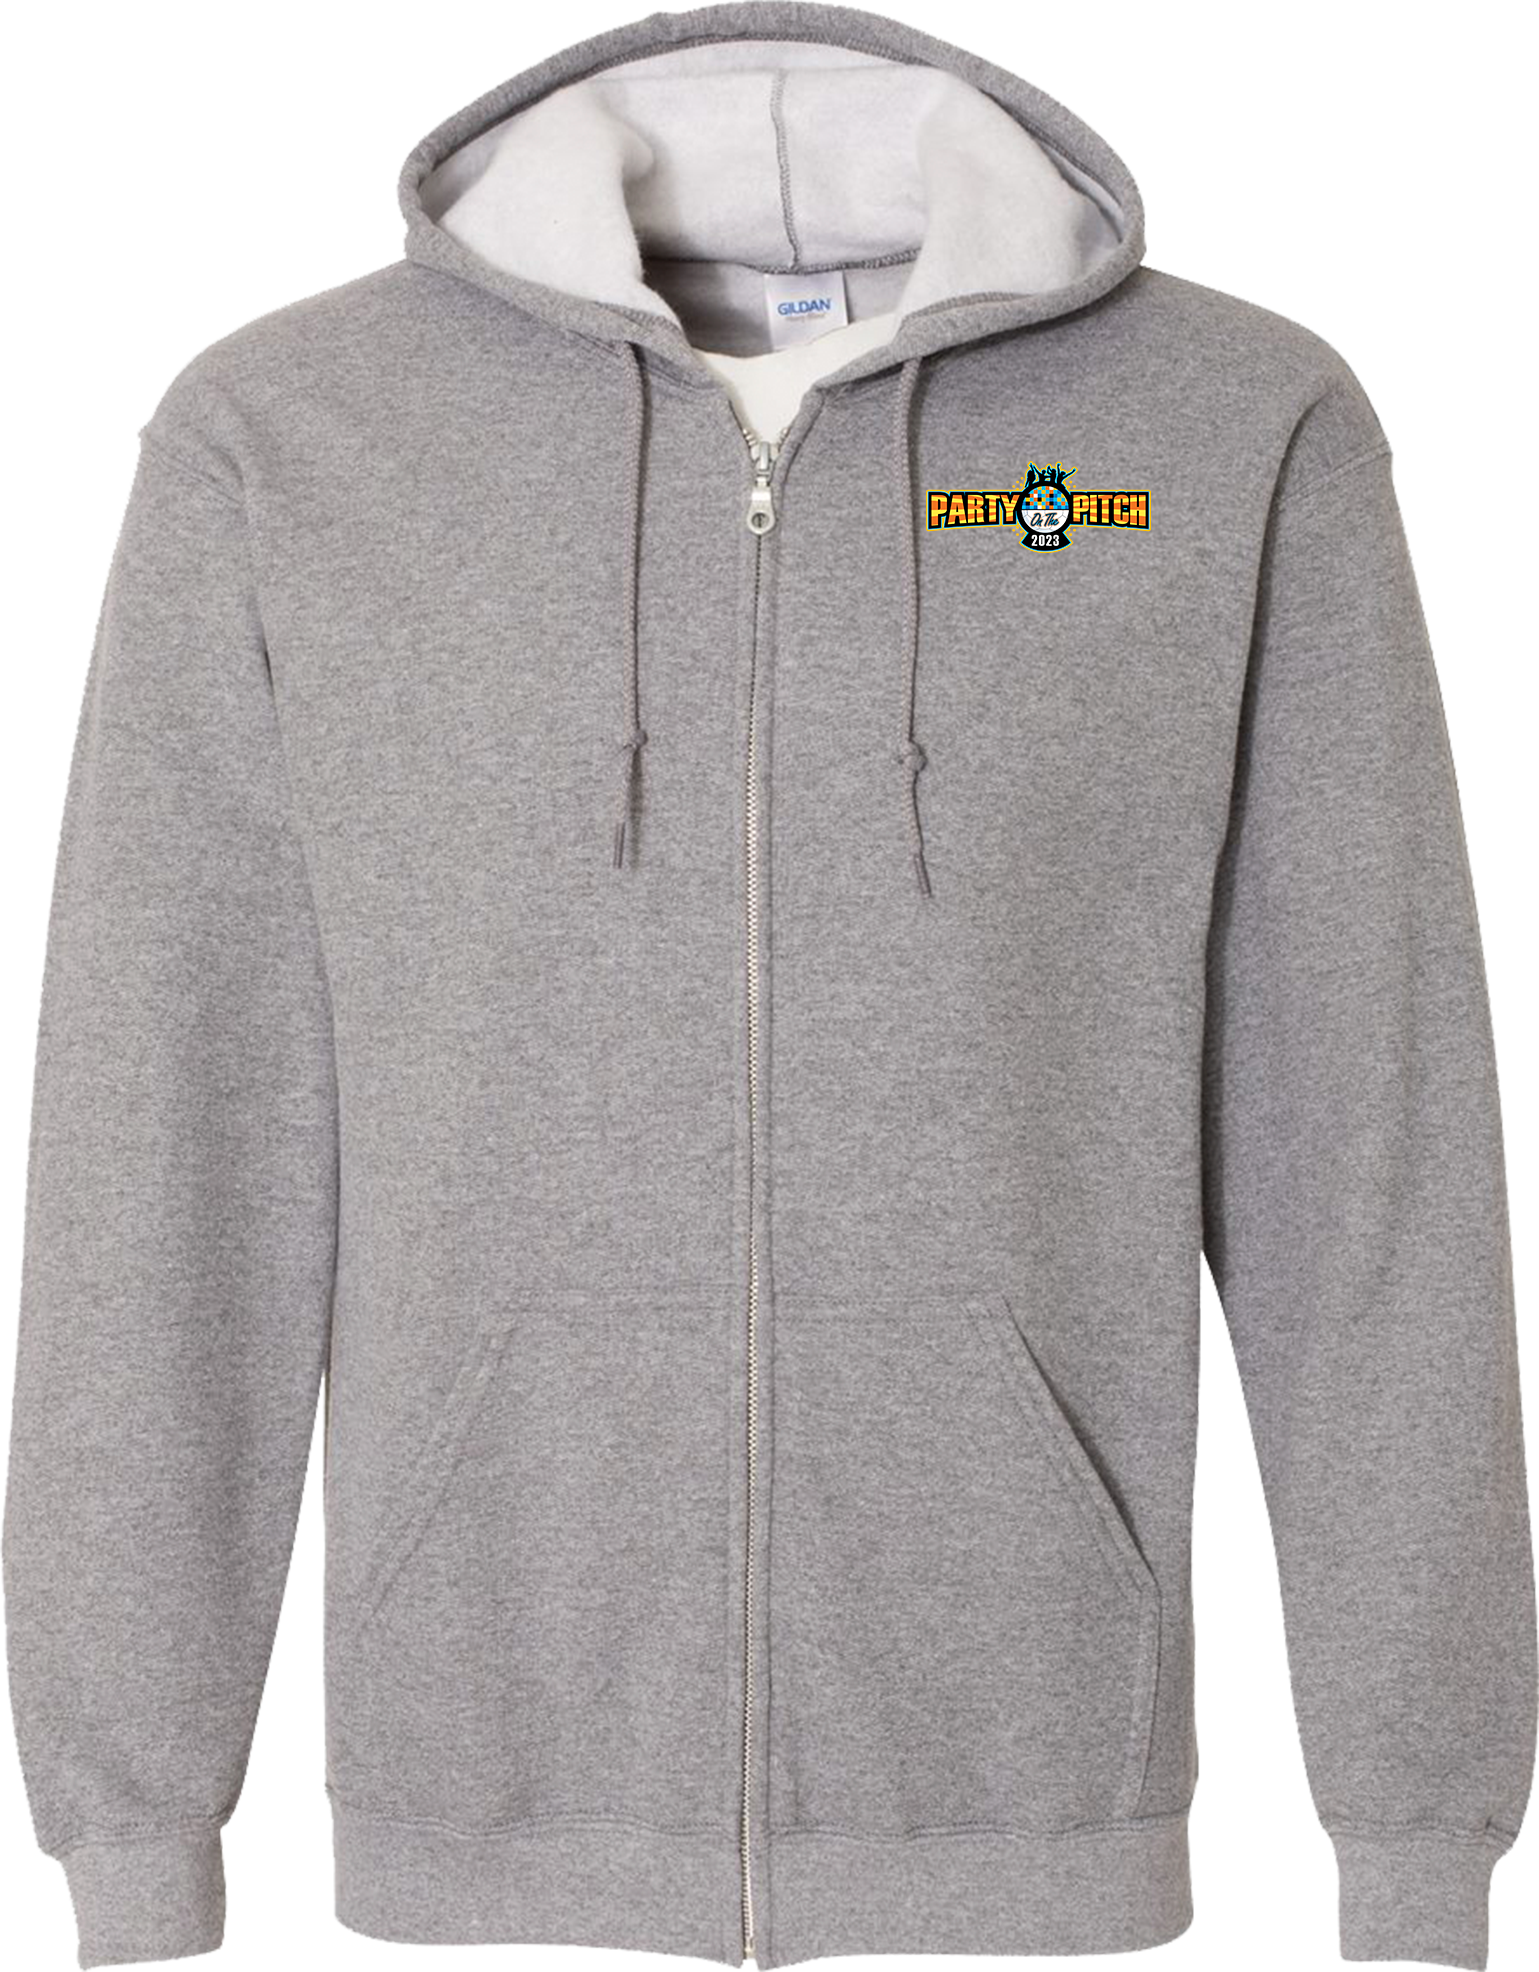 FULL ZIP HOODIES - 2023 Party On The Pitch